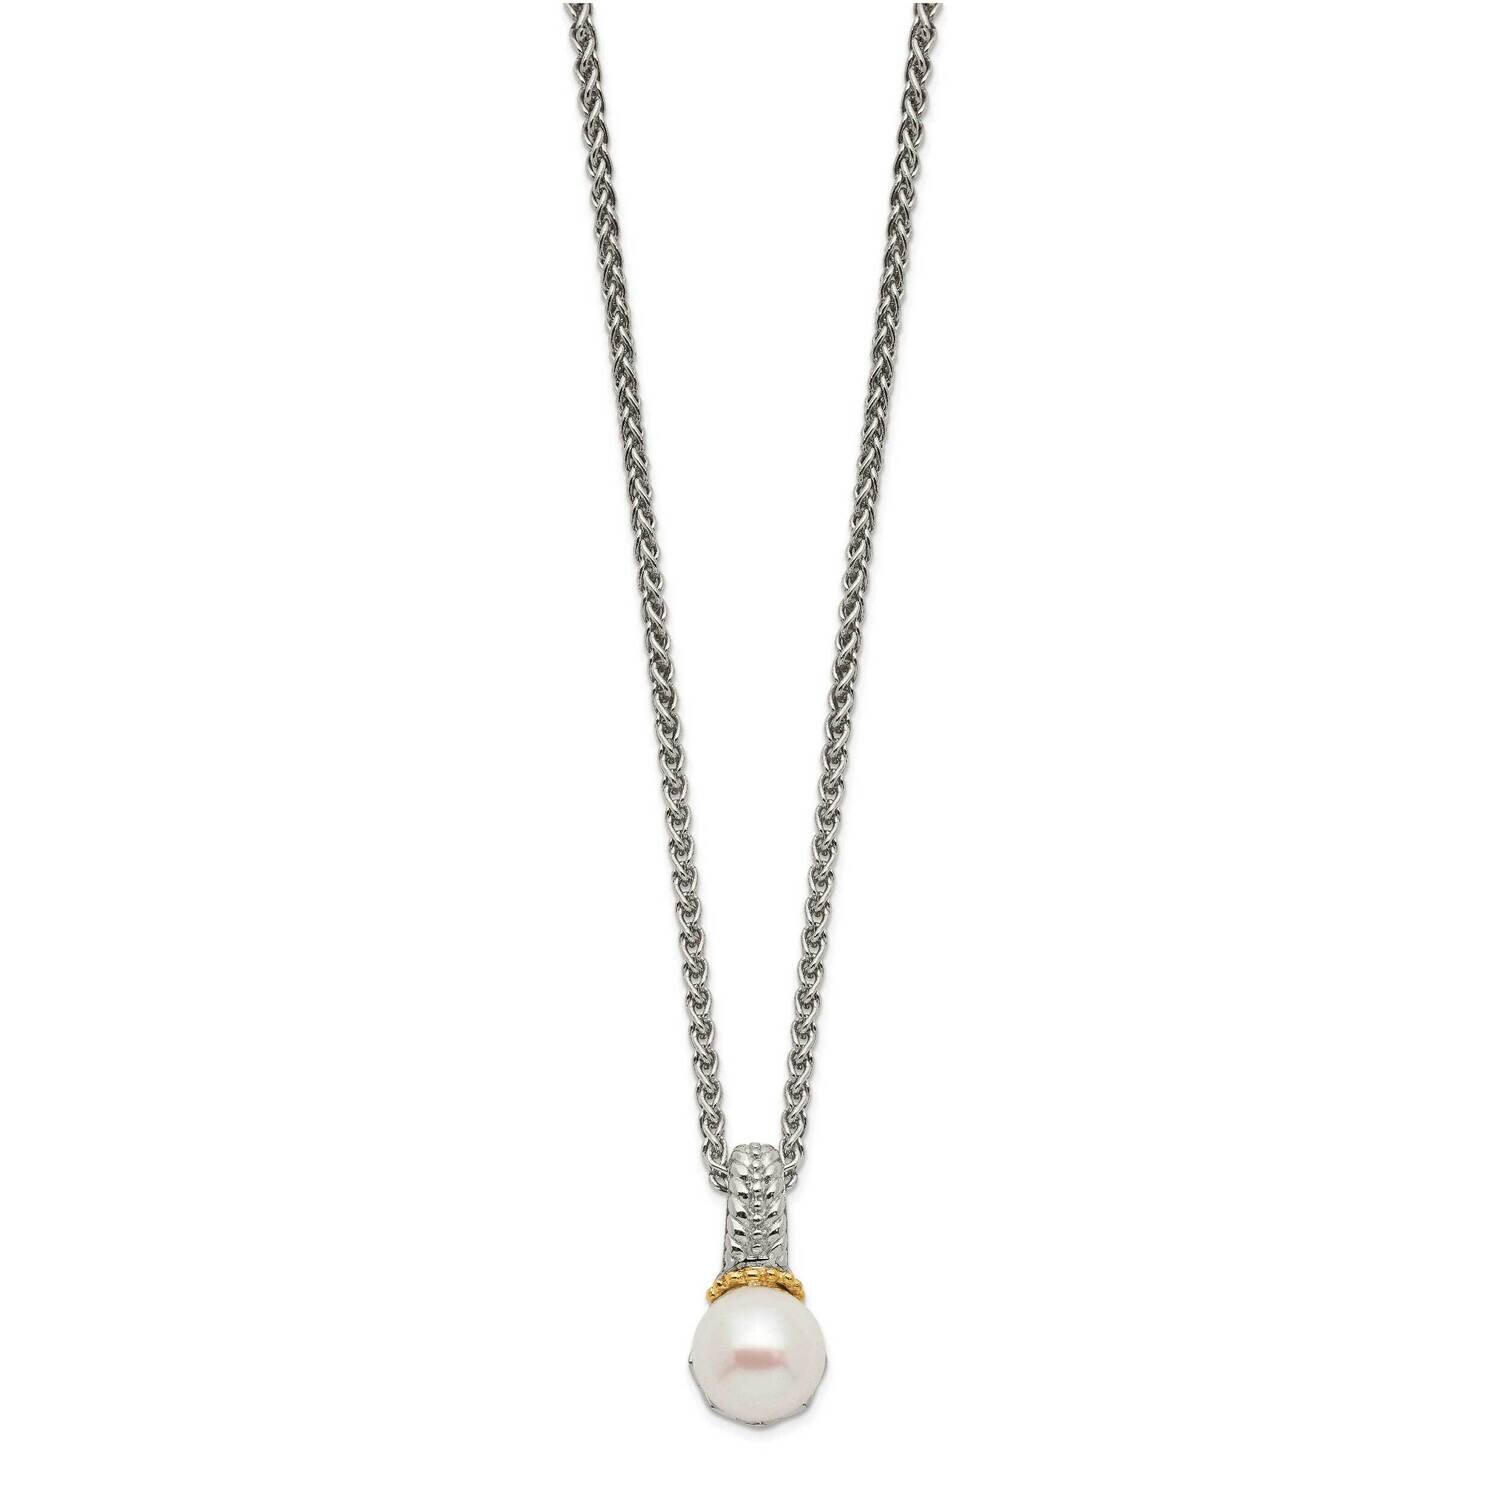 Accent 8-9mm Cultured Freshwater Pearl Chain Slide Necklace 18 Inch Sterling Silver with 14k Gold QTC1533